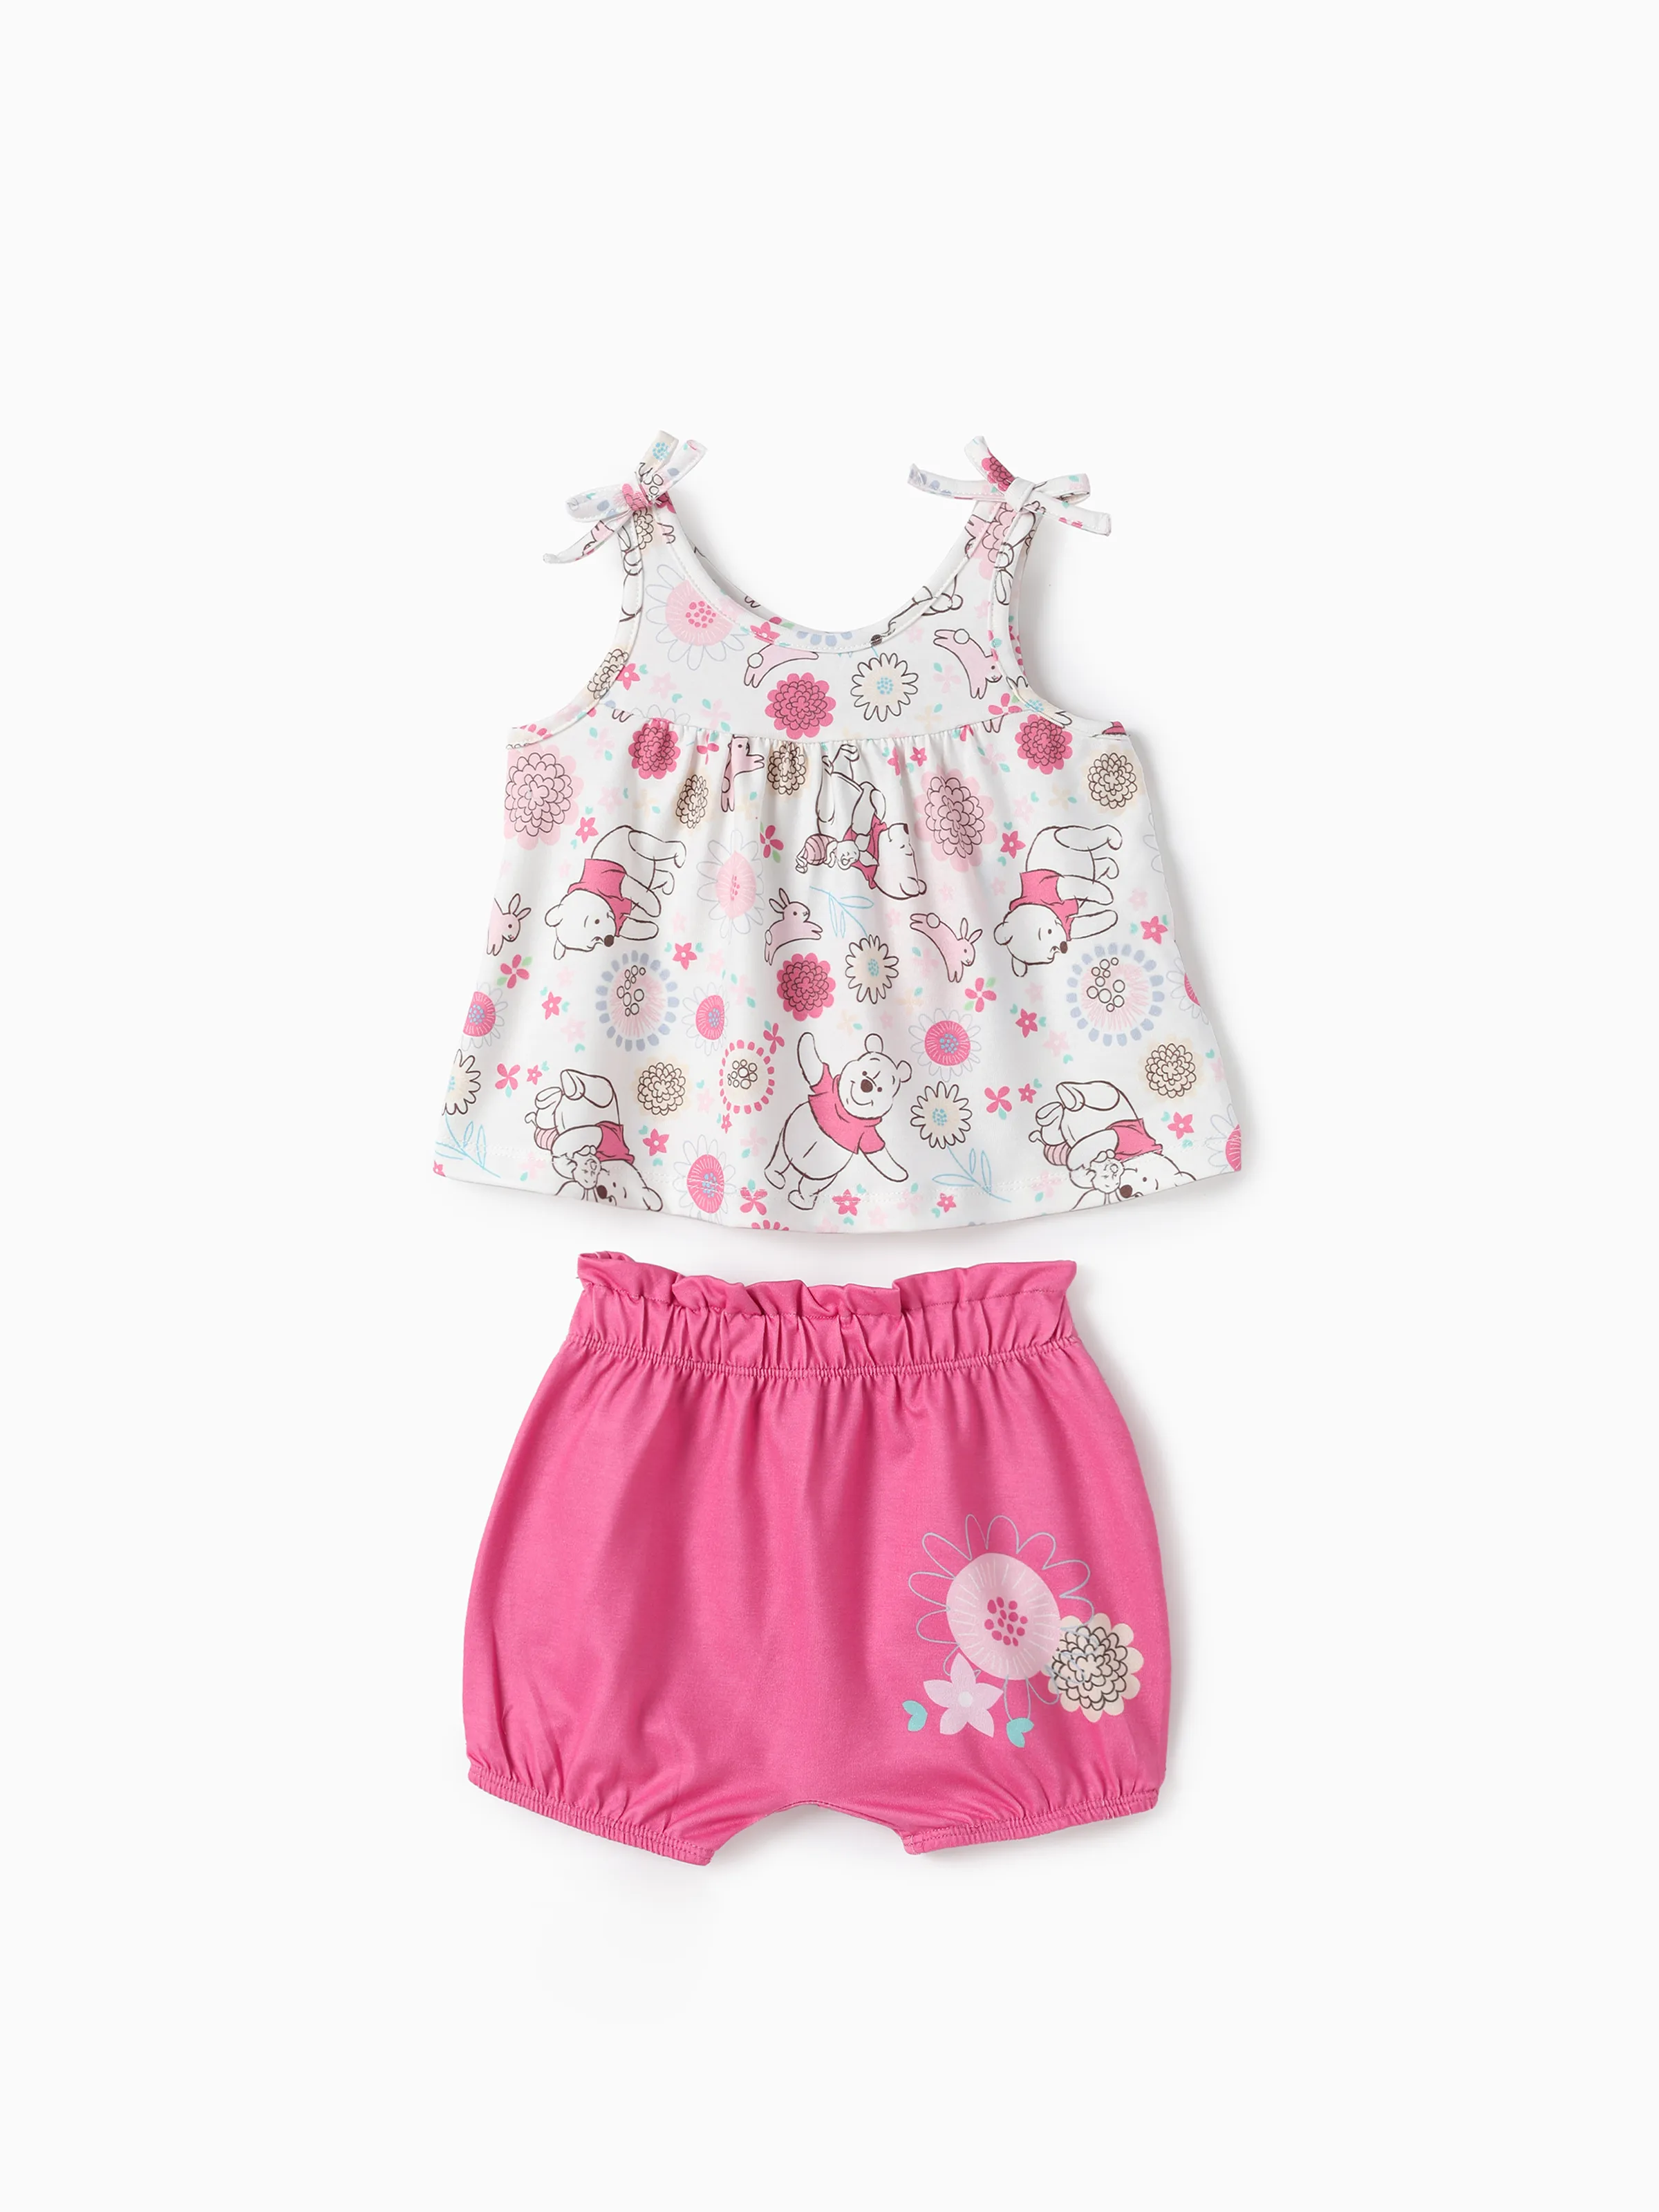 

Disney Winnie the Pooth Baby Girls 2pcs Naia™ Character Floral Print Sleeveless Bow tie Top with Stripe Shorts Set